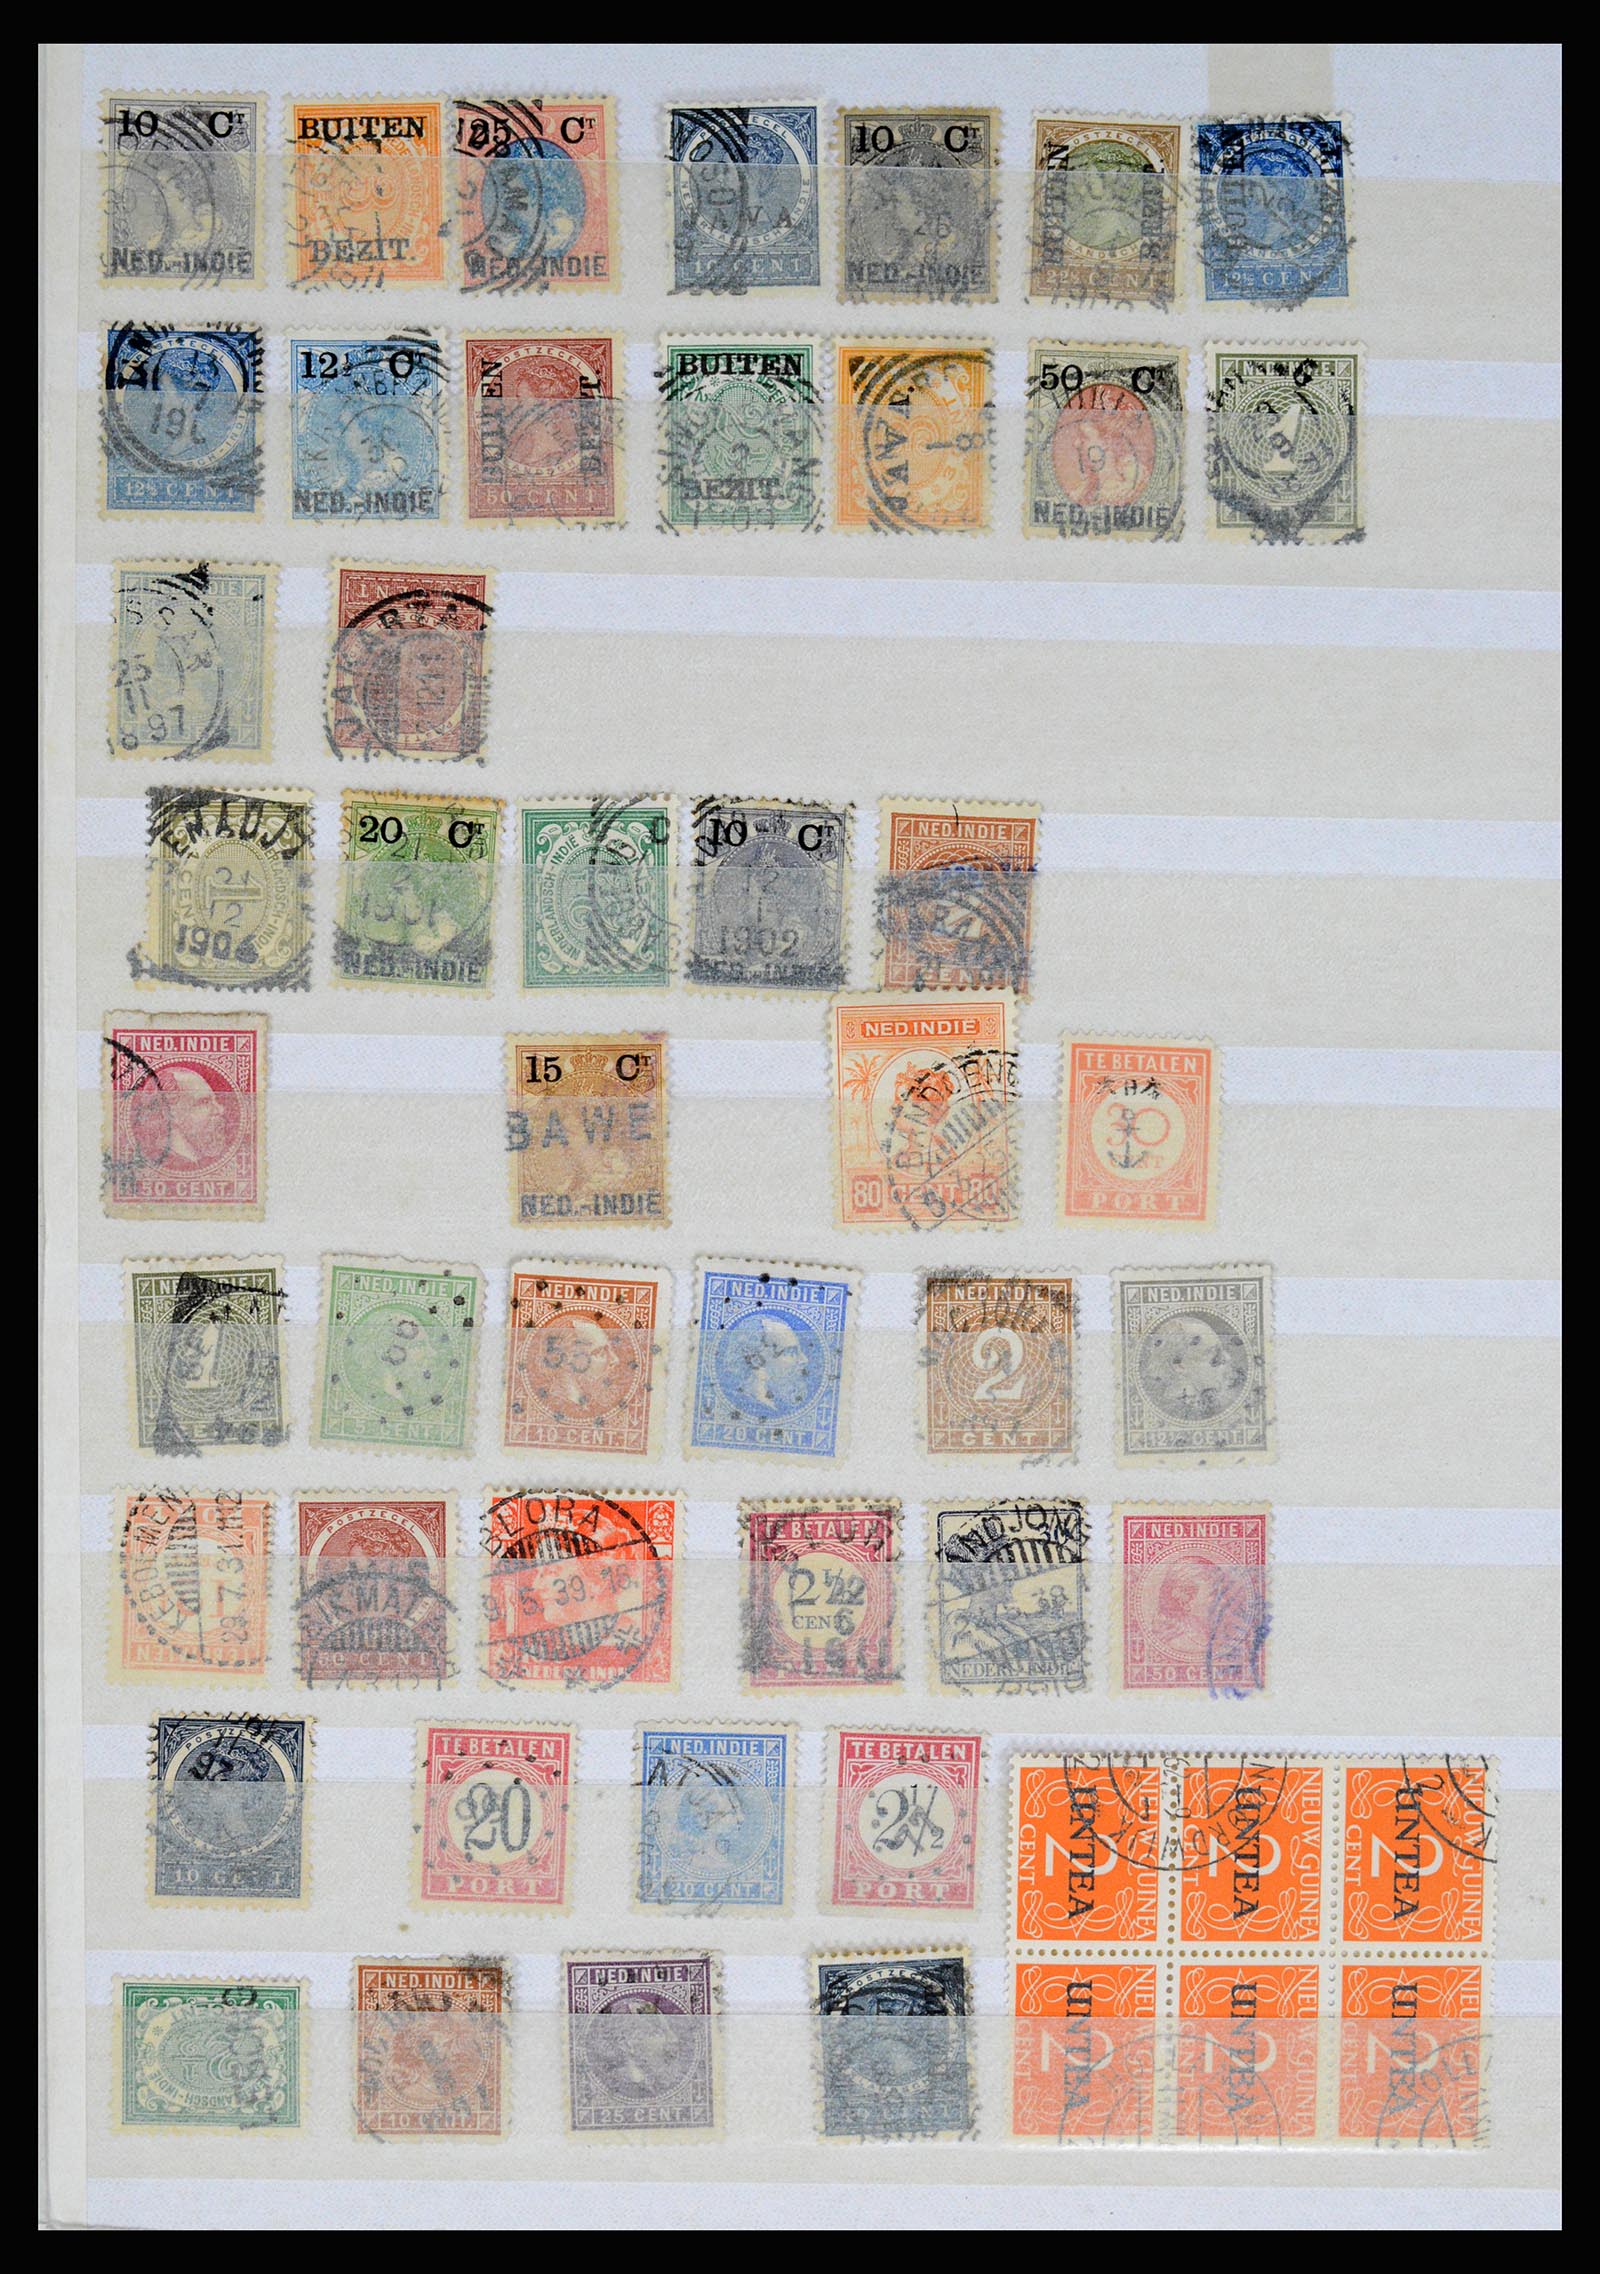 36839 110 - Stamp collection 36839 Dutch east Indies square cancels.